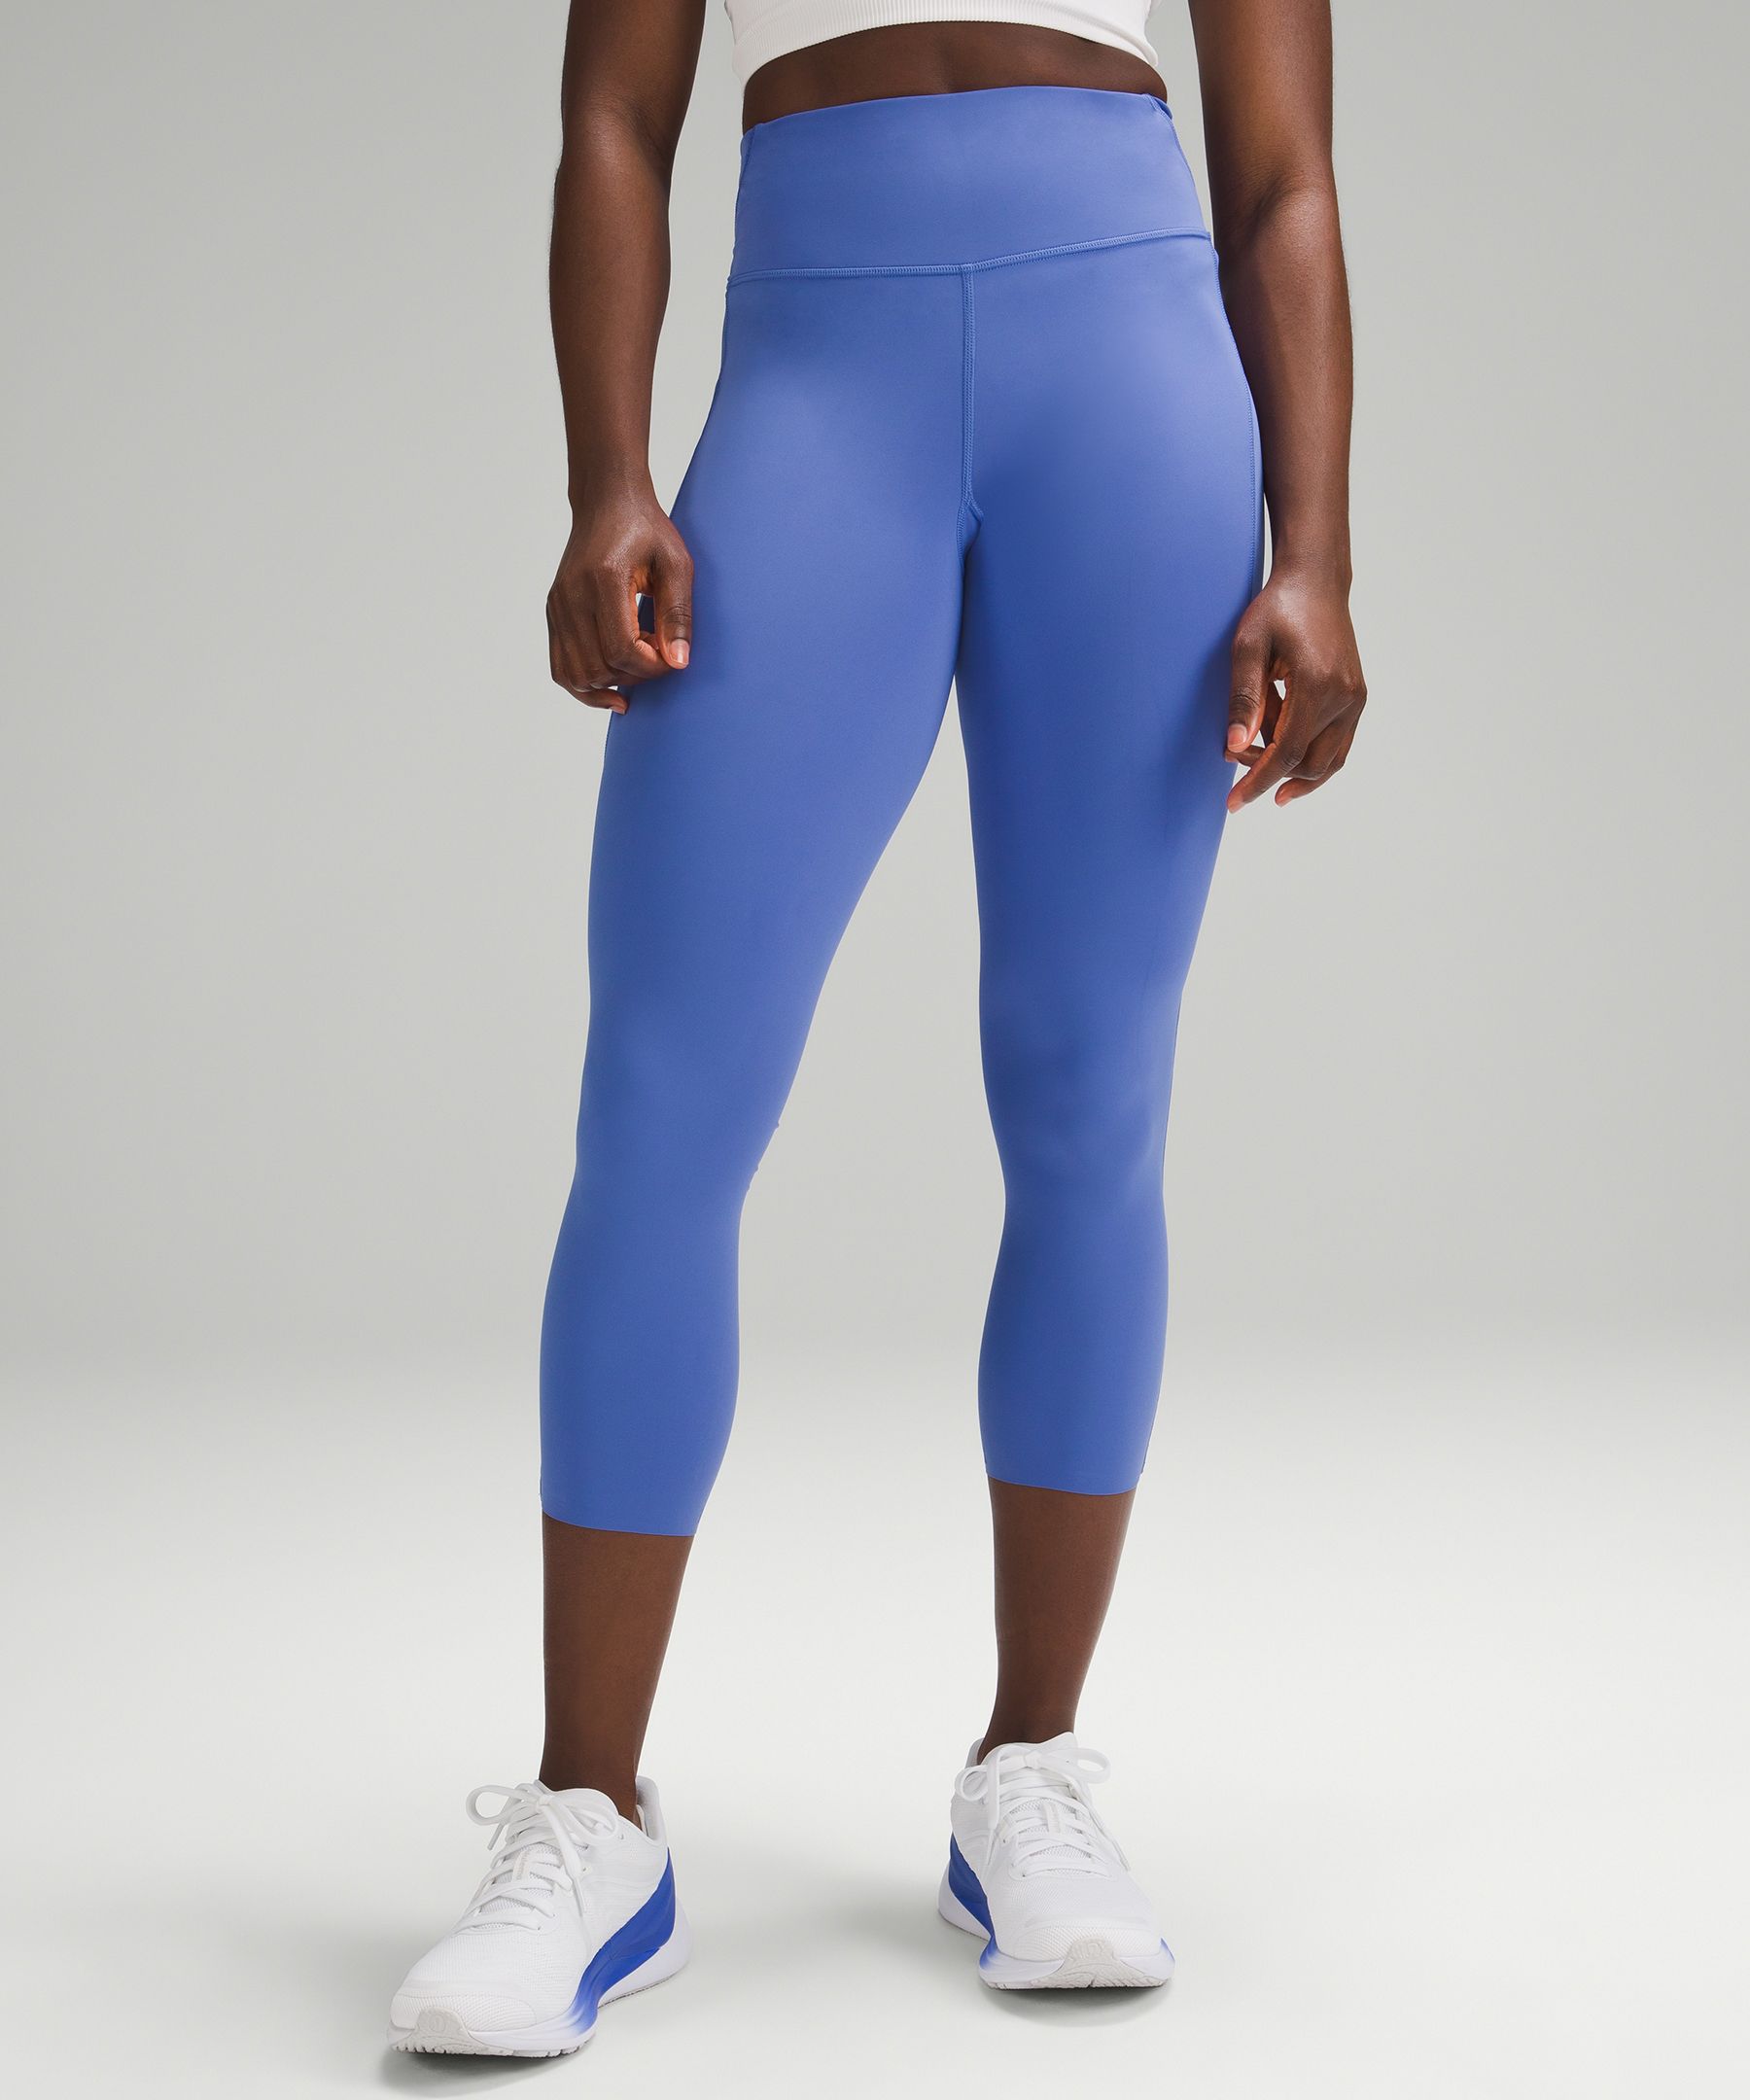 Lululemon Fast and Free High-Rise Crop 23 Pockets